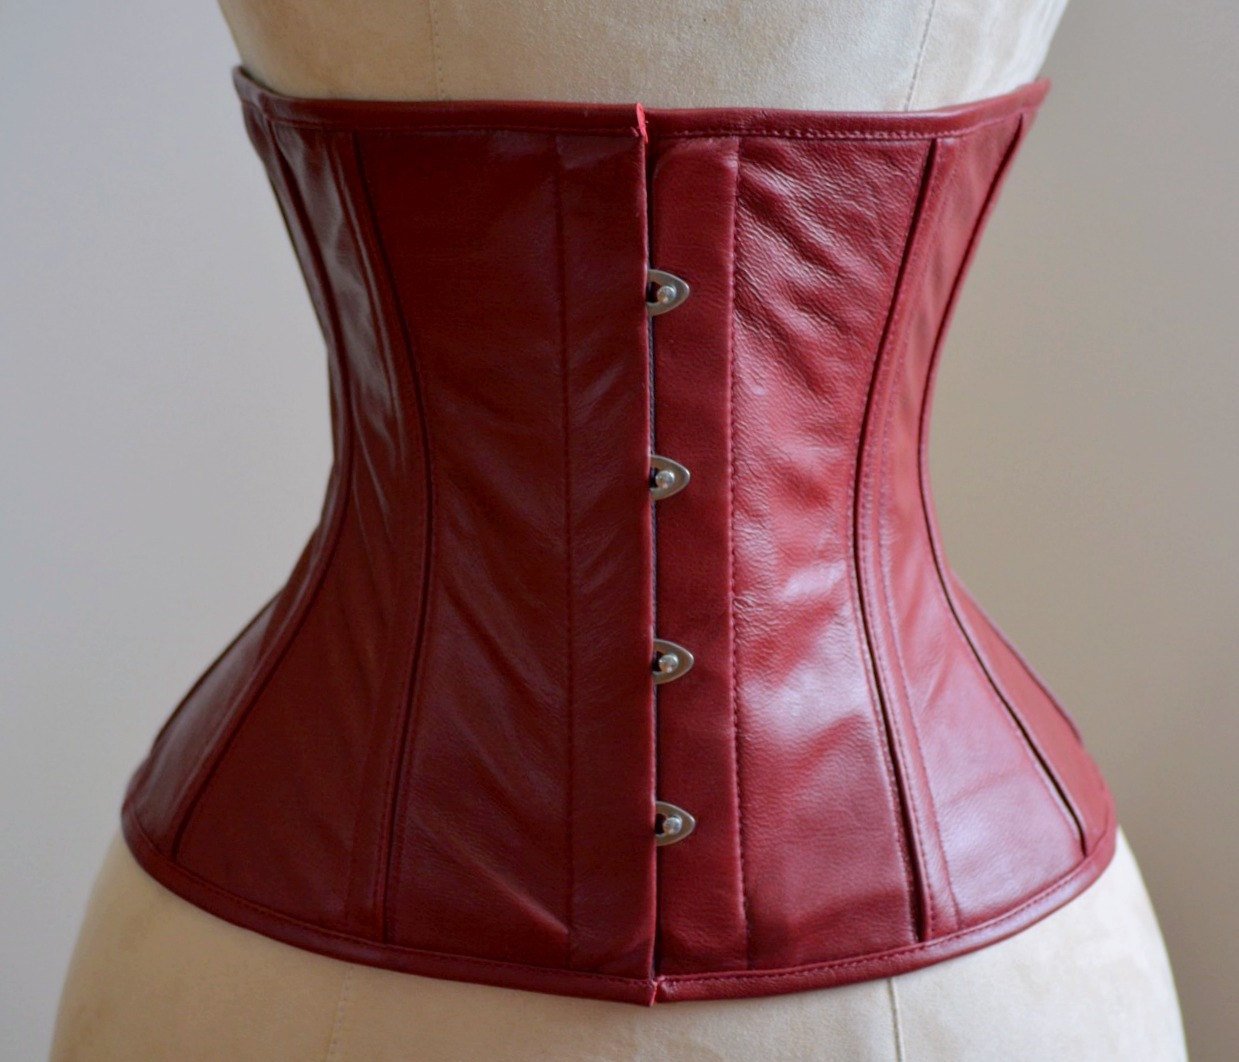 Real leather steampunk/gothi style underbust corset vest with metal decor,  authentic steel-boned custom made corset for waist training and tight